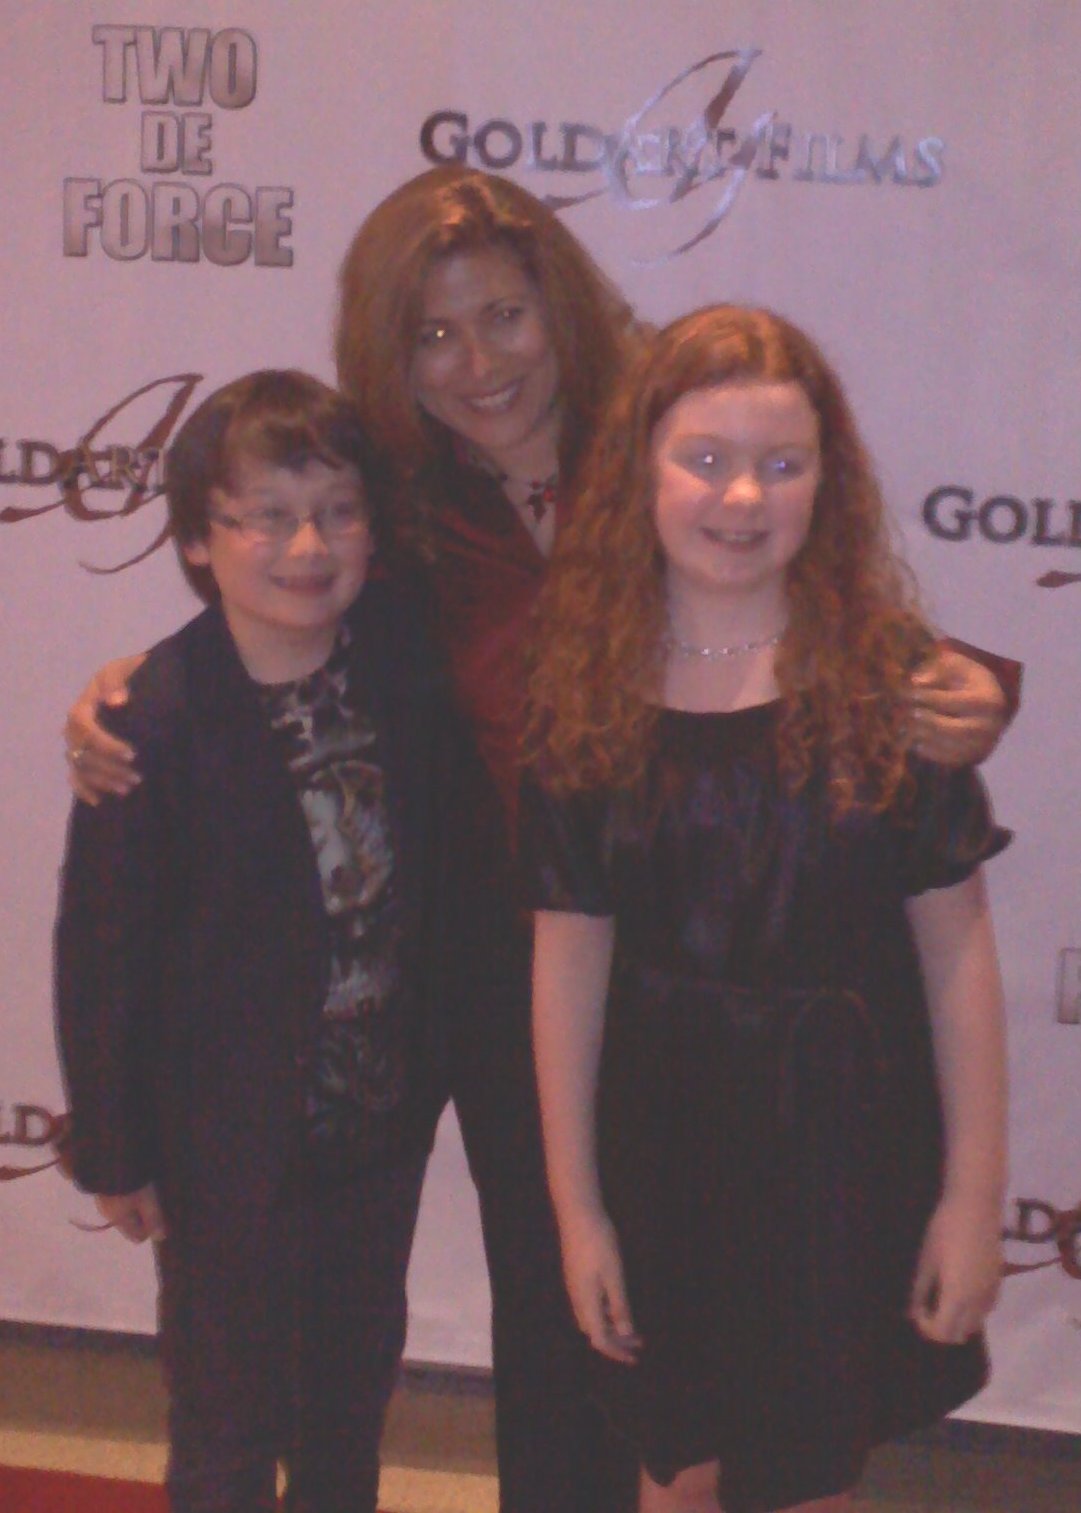 Matthew with Executive Producer, Orna Rachovitsky (C) and actress, Amelia Compton (L)on the red carpet at the premiere of Two de Force.